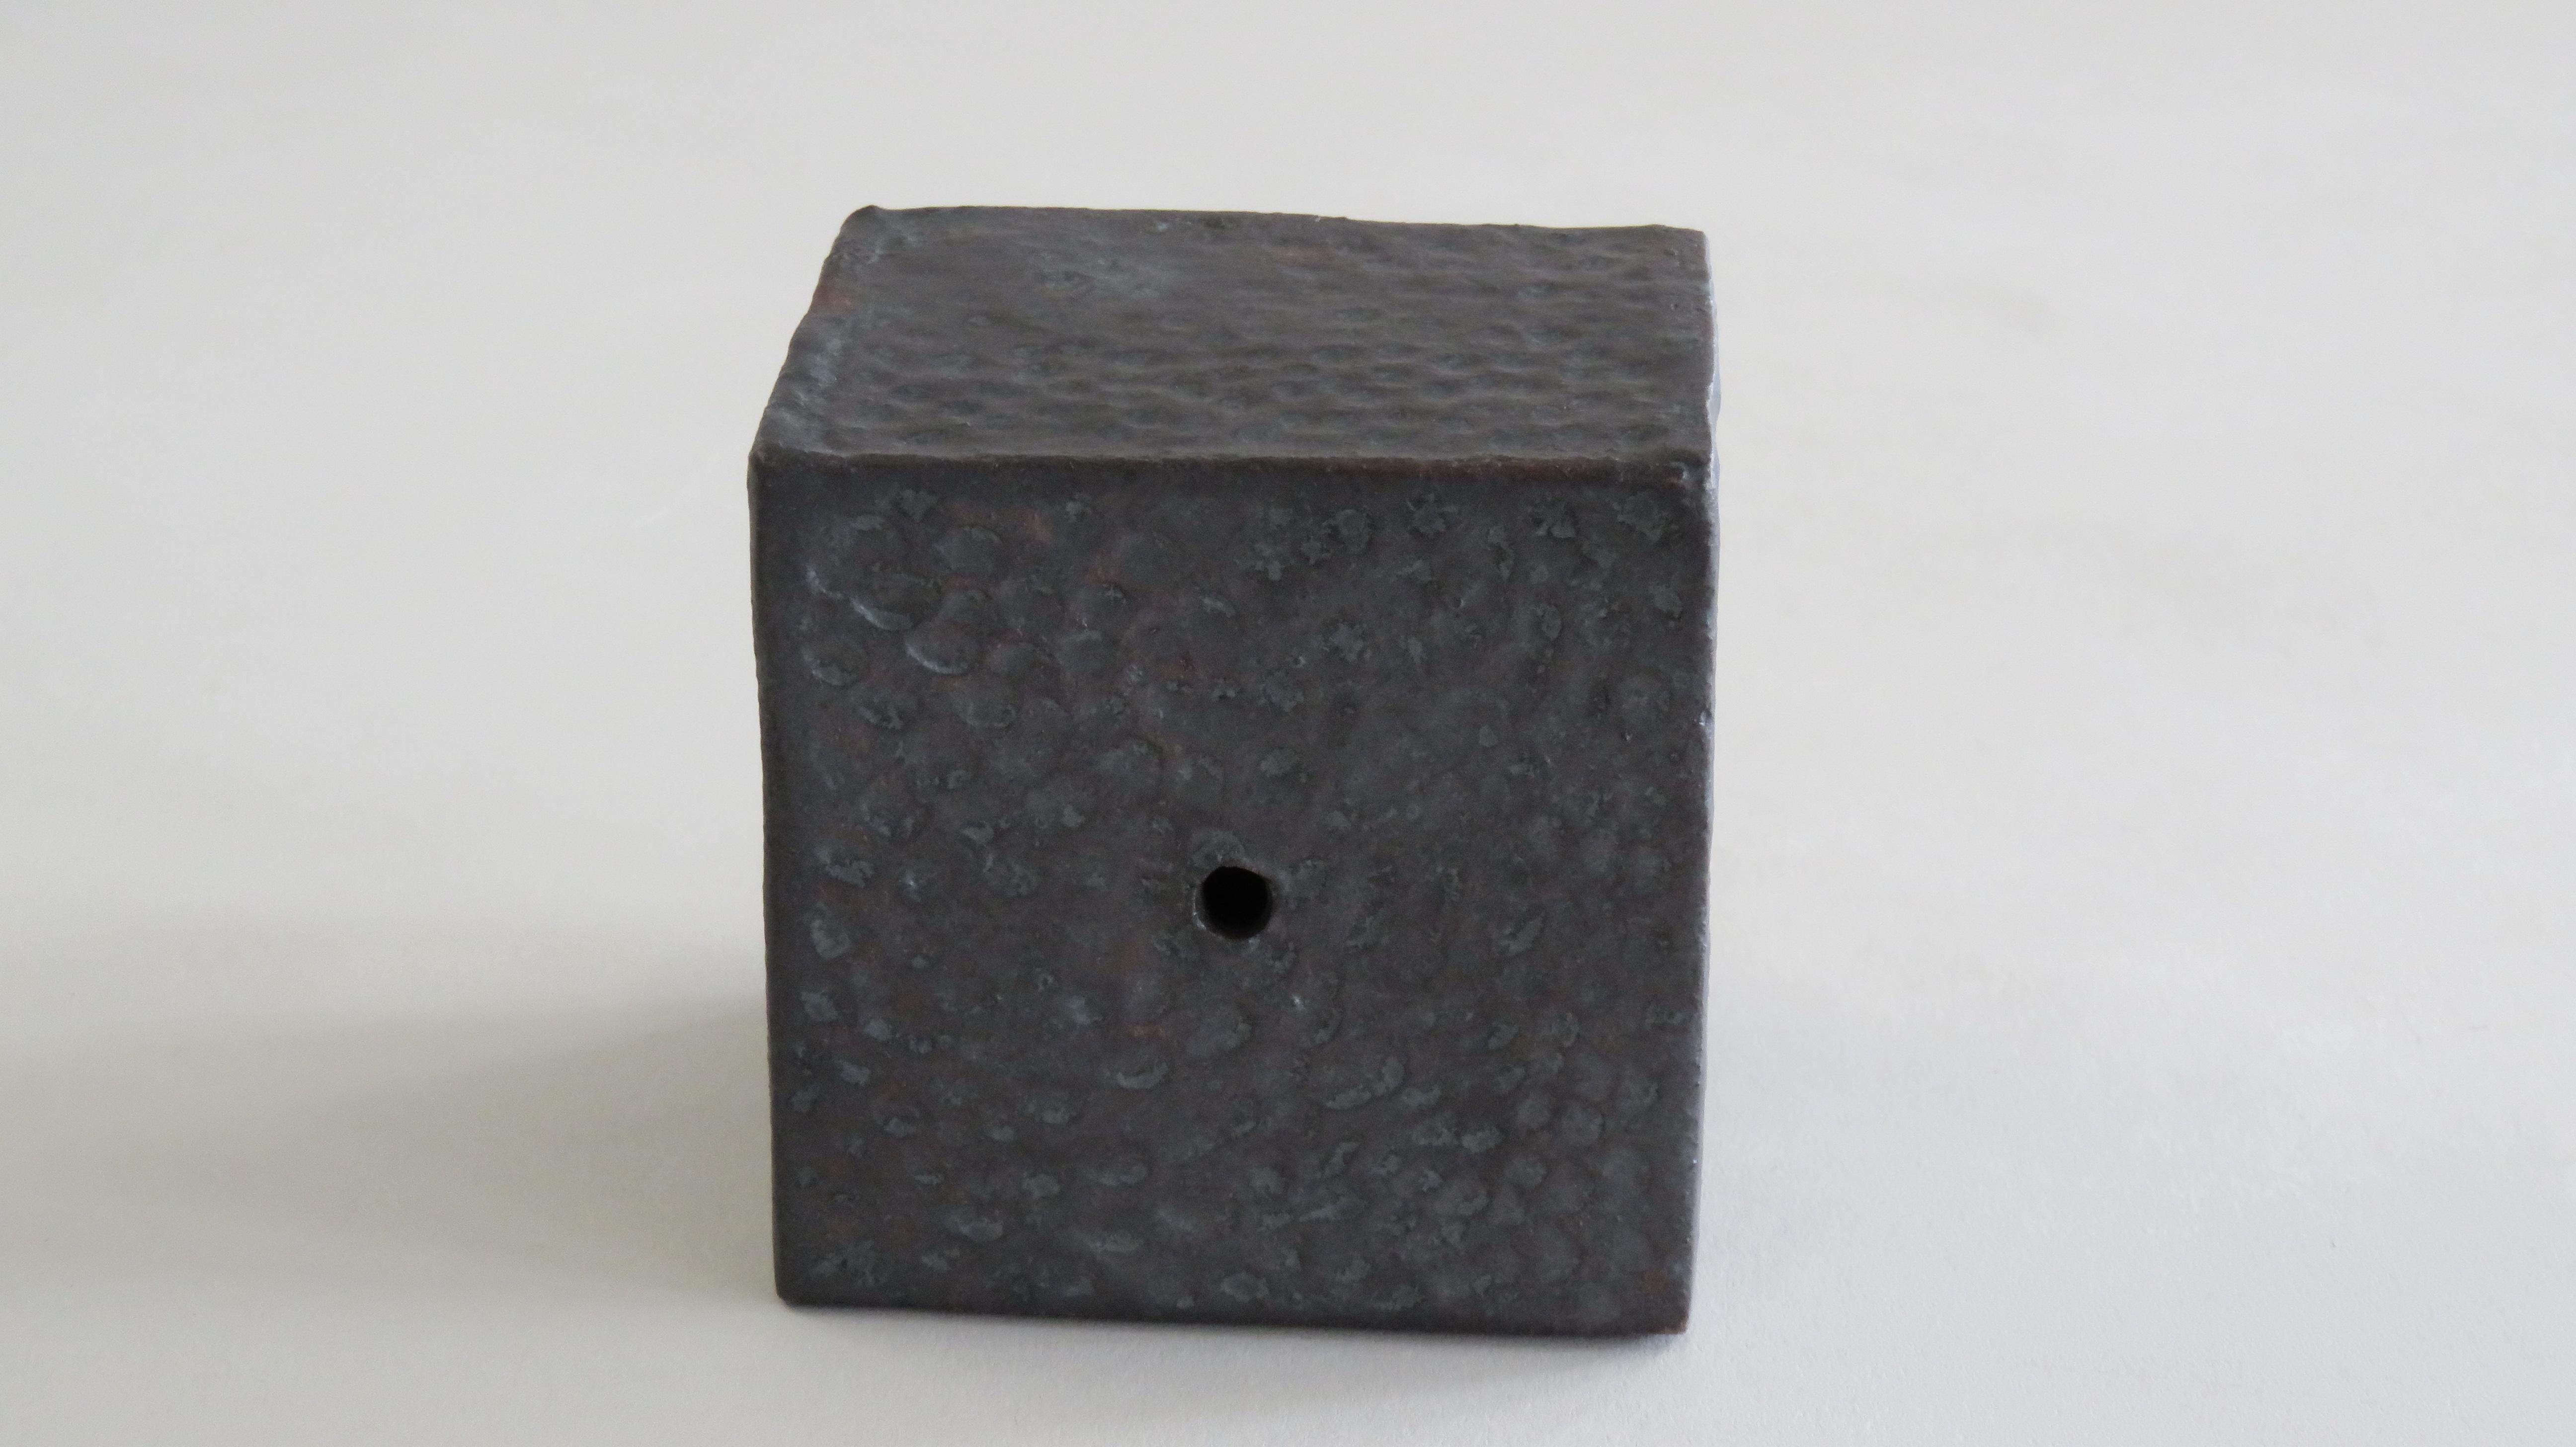 Glazed Small Ceramic Contemplation Cube, Mottled Surface in Metallic Black-Brown Glaze